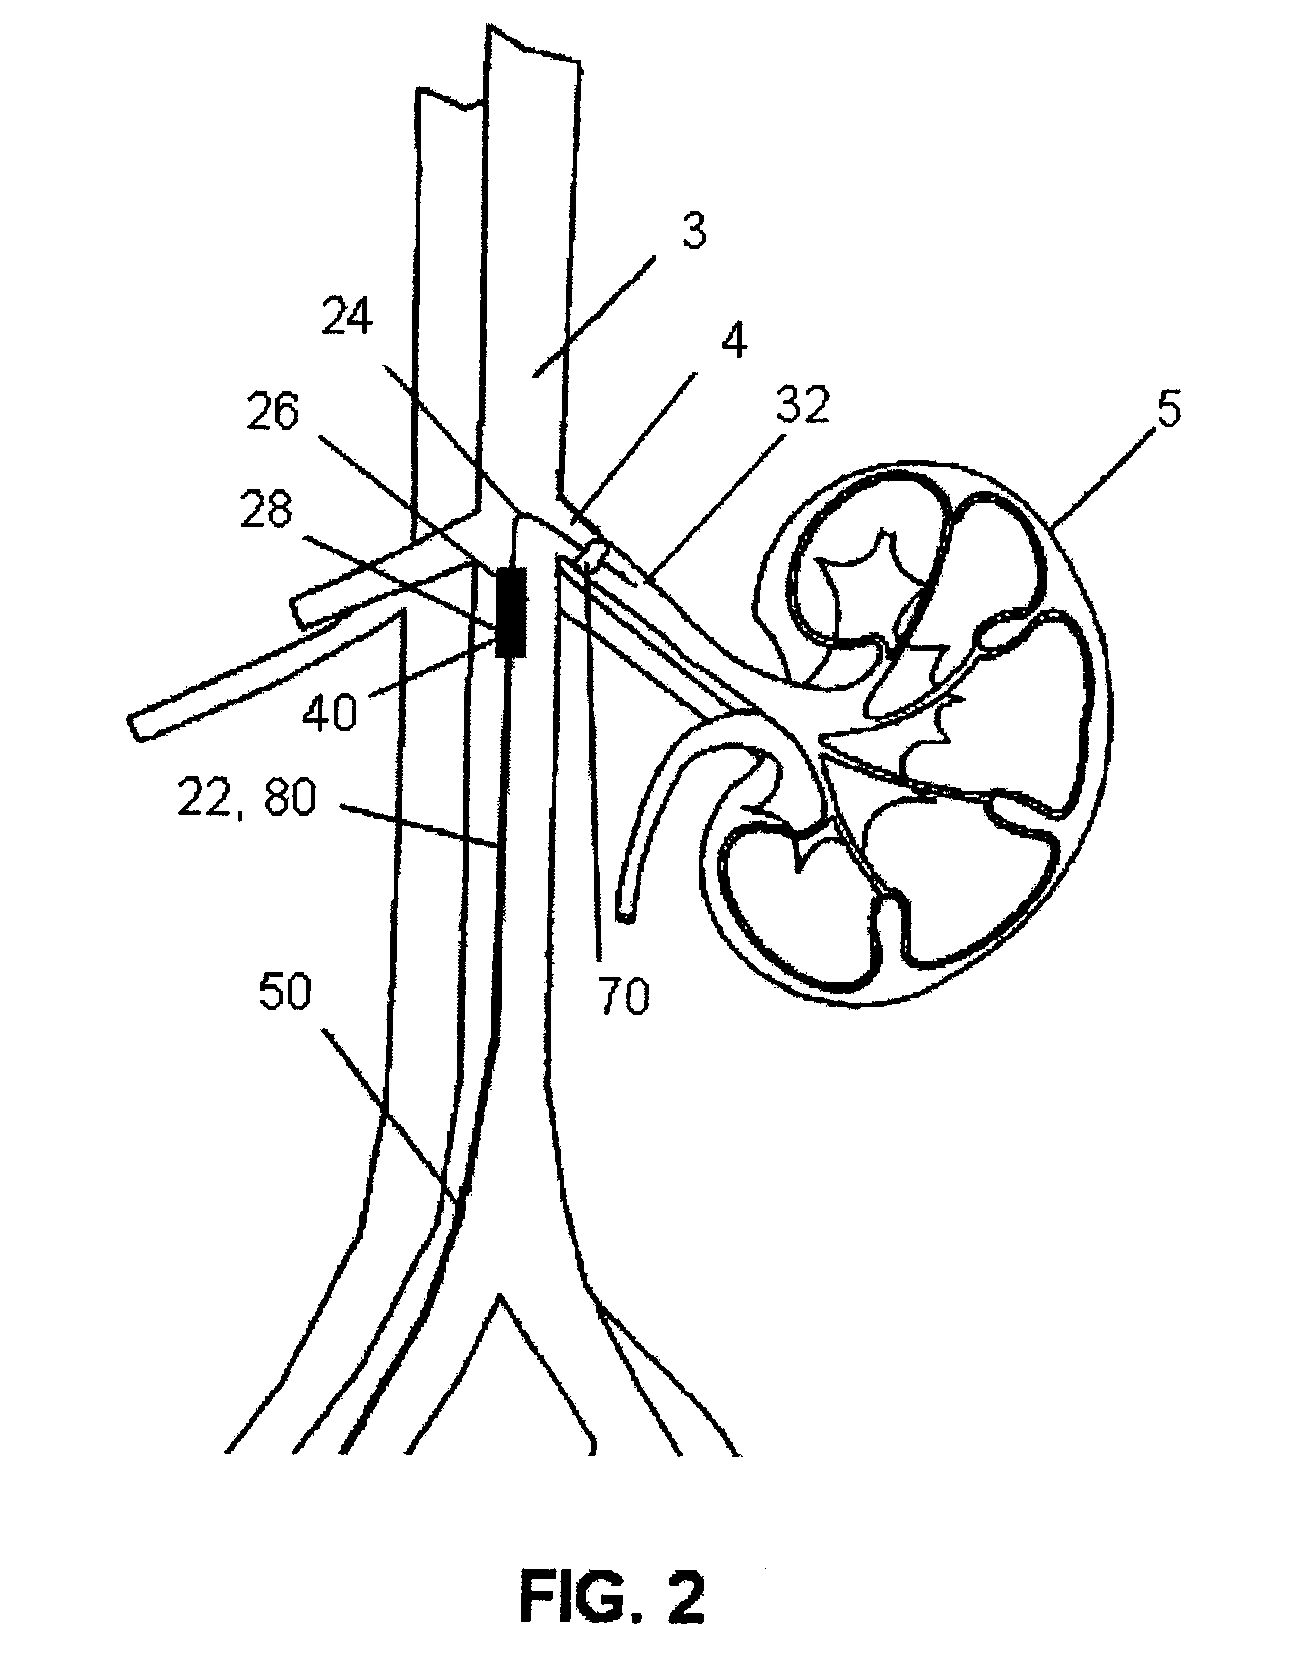 Method and Apparatus for Treatment of Congestive Heart Disease